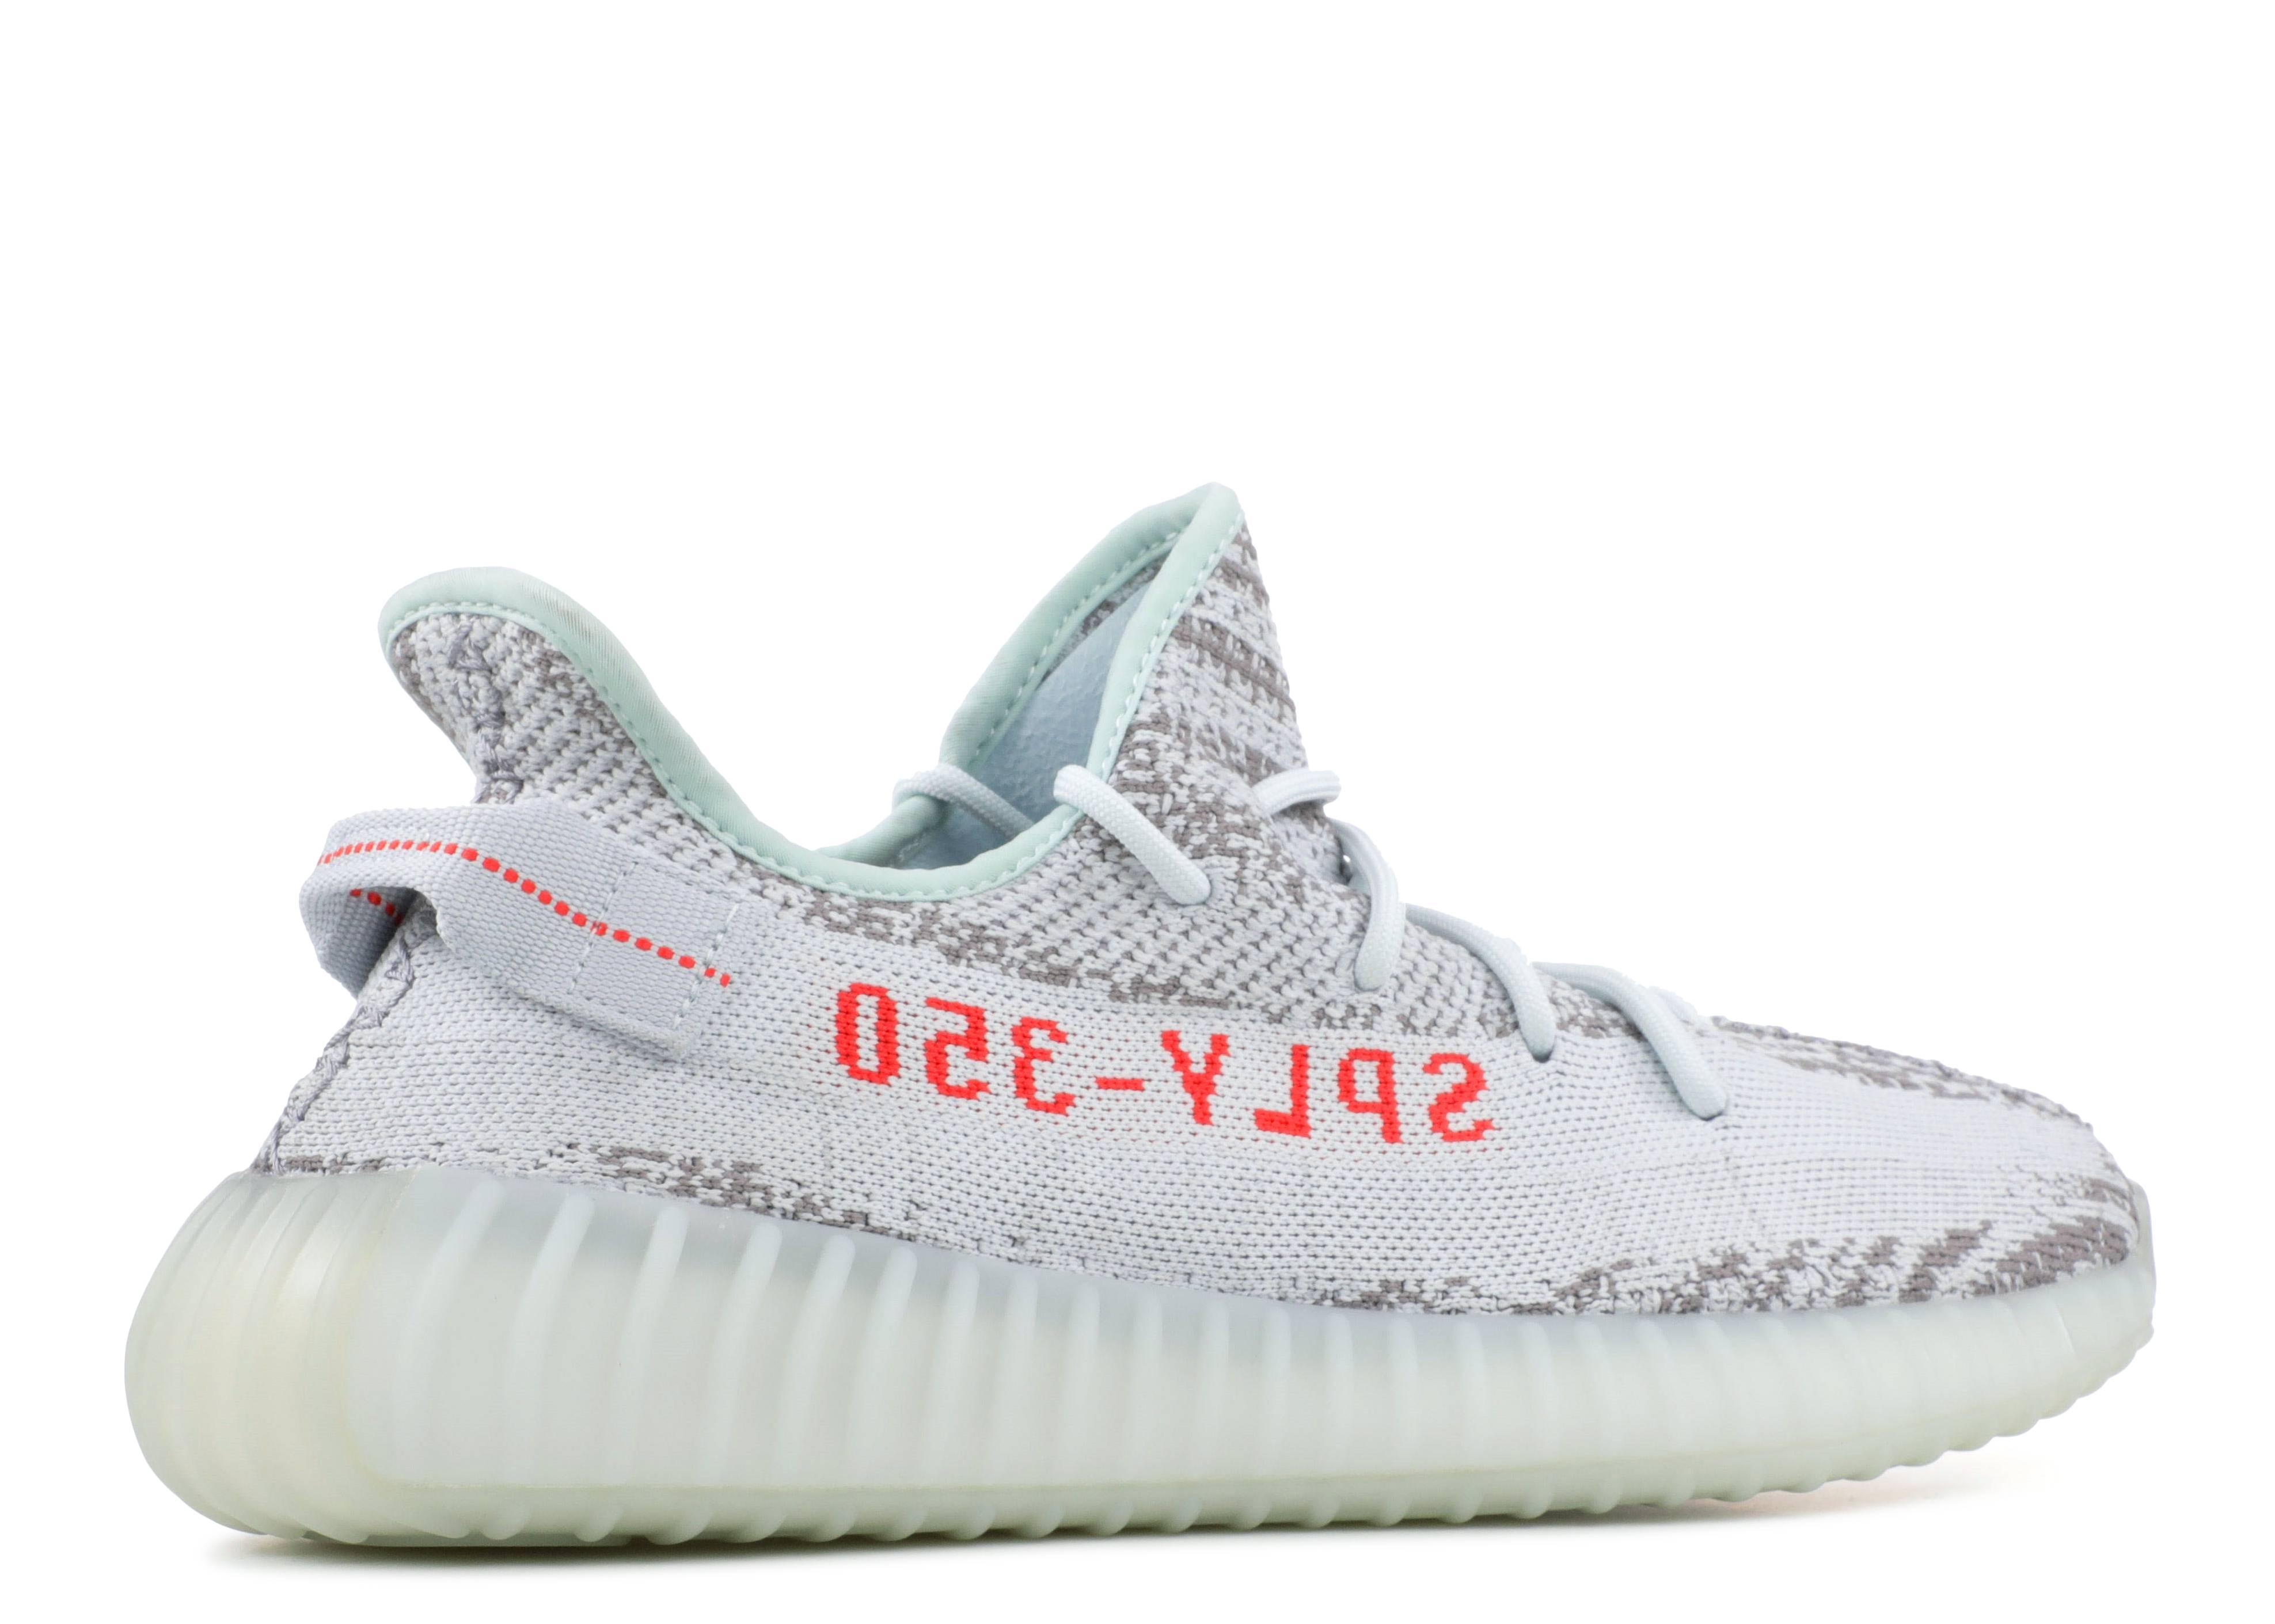 adidas Yeezy Boost 350 V2 'blue Tint' Shoes - Size 4.5 for Men - Save ...